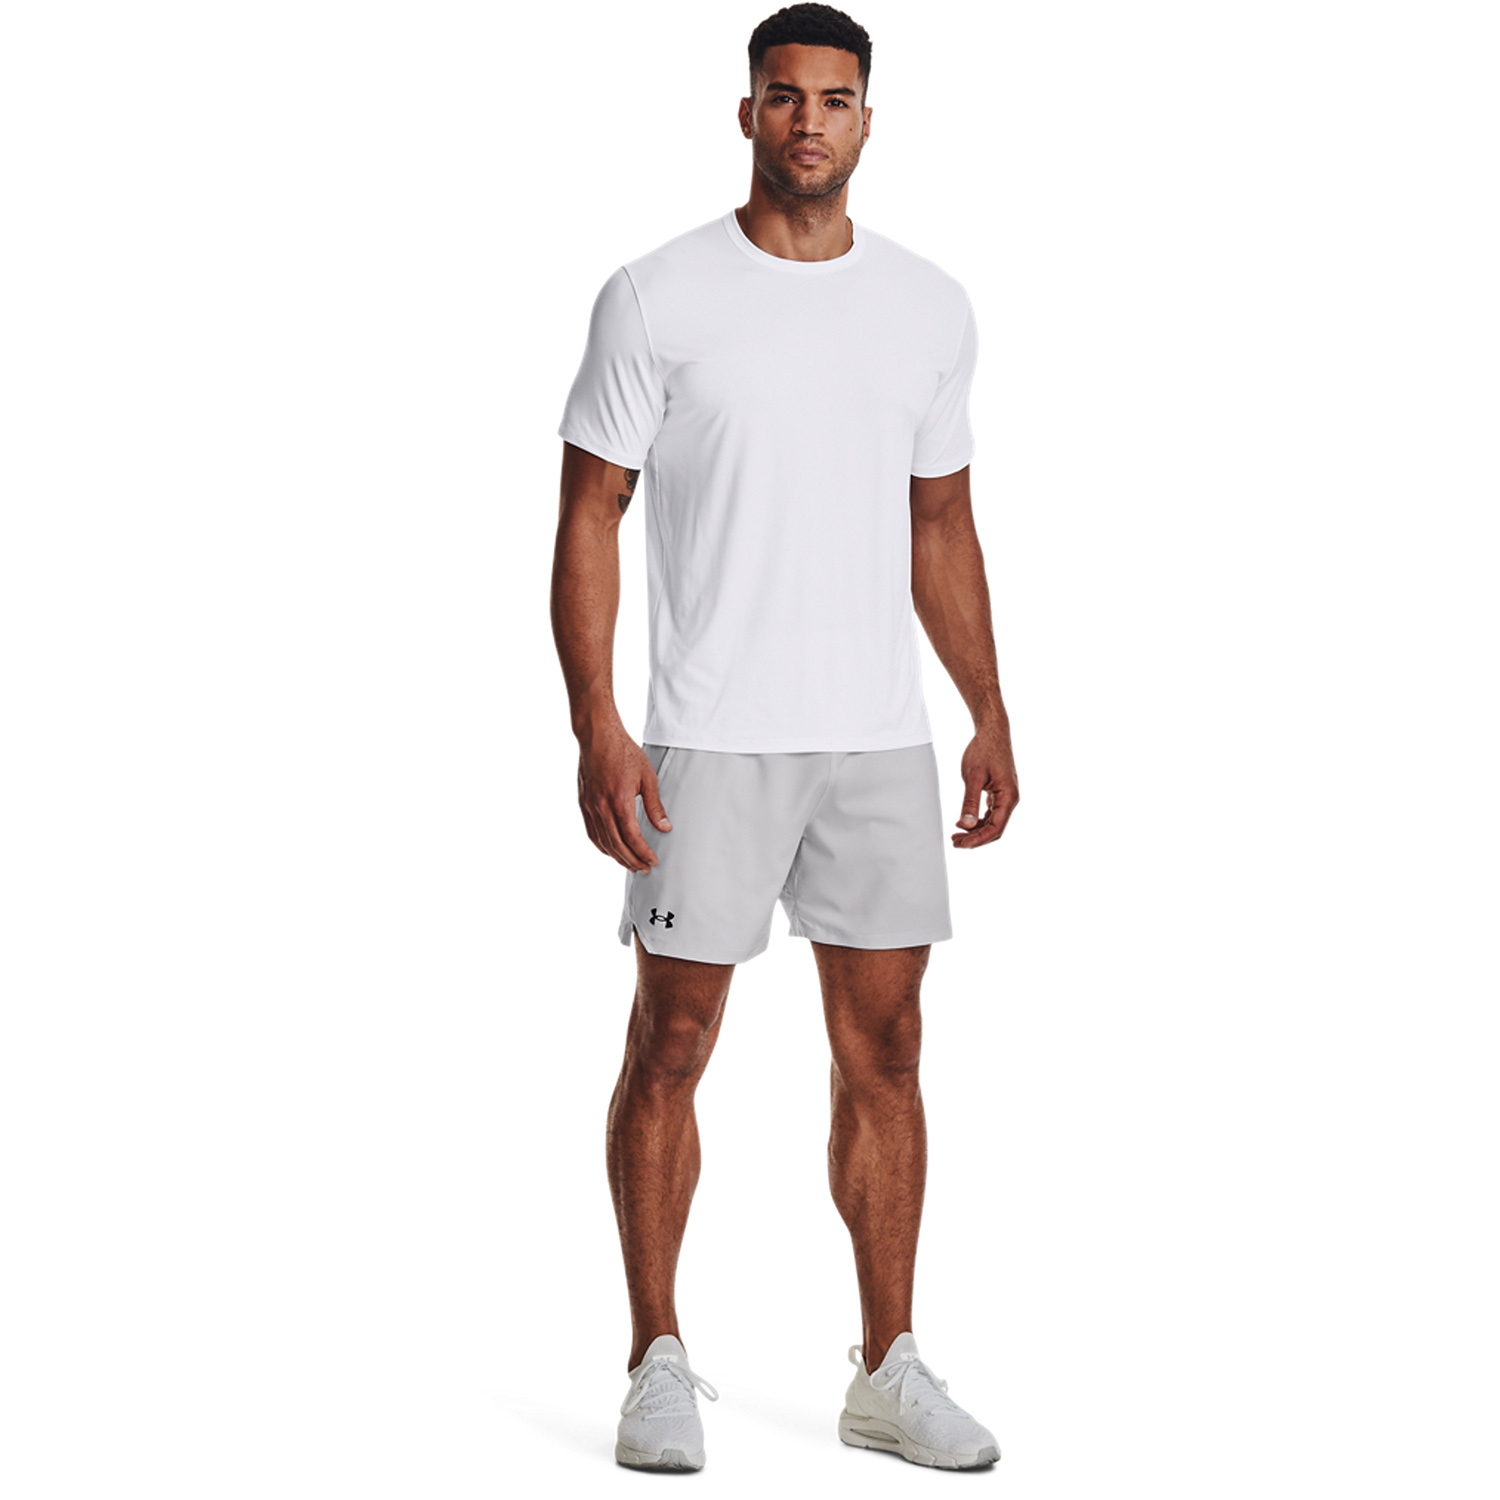 Under Armour Vanish Woven 6in Shorts - Halo Gray/Black